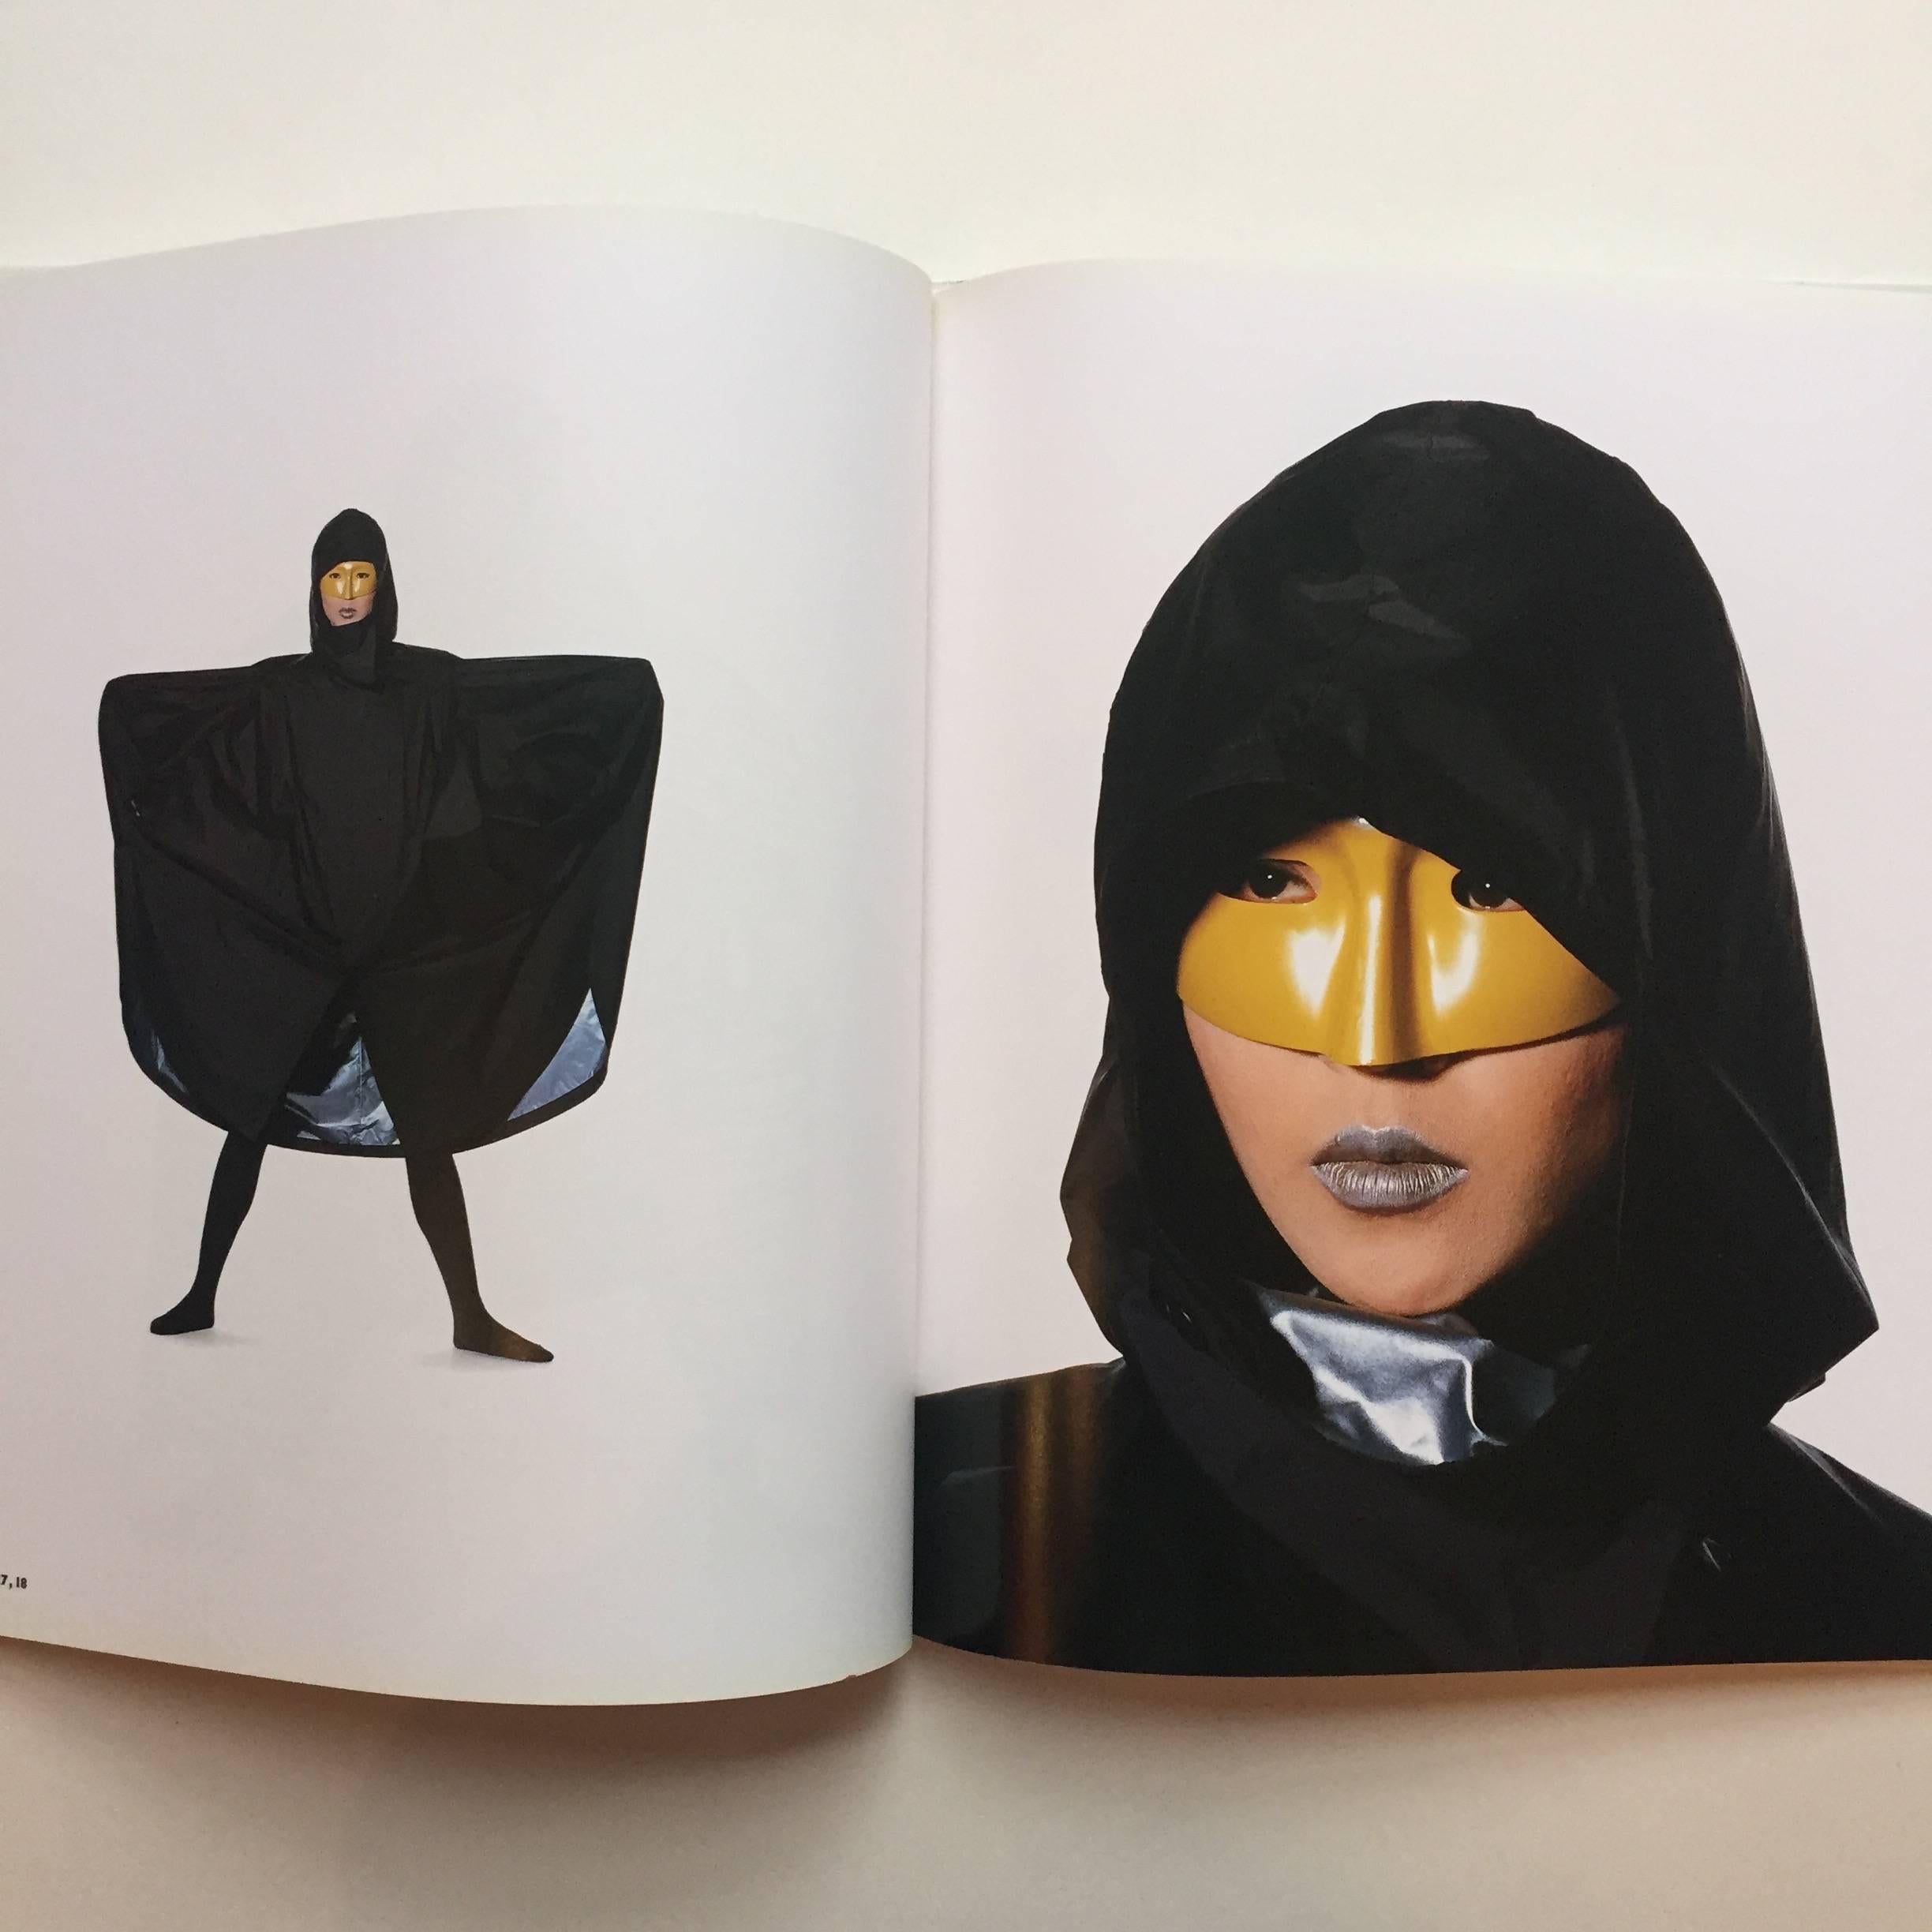 First edition, published by Little, Brown & Company, 1988

Irving Penn captures the work of Issey Miyake, this book explores the artistic relationship between Penn, one of the most prominent photographers of the 20th century and Miyake, the